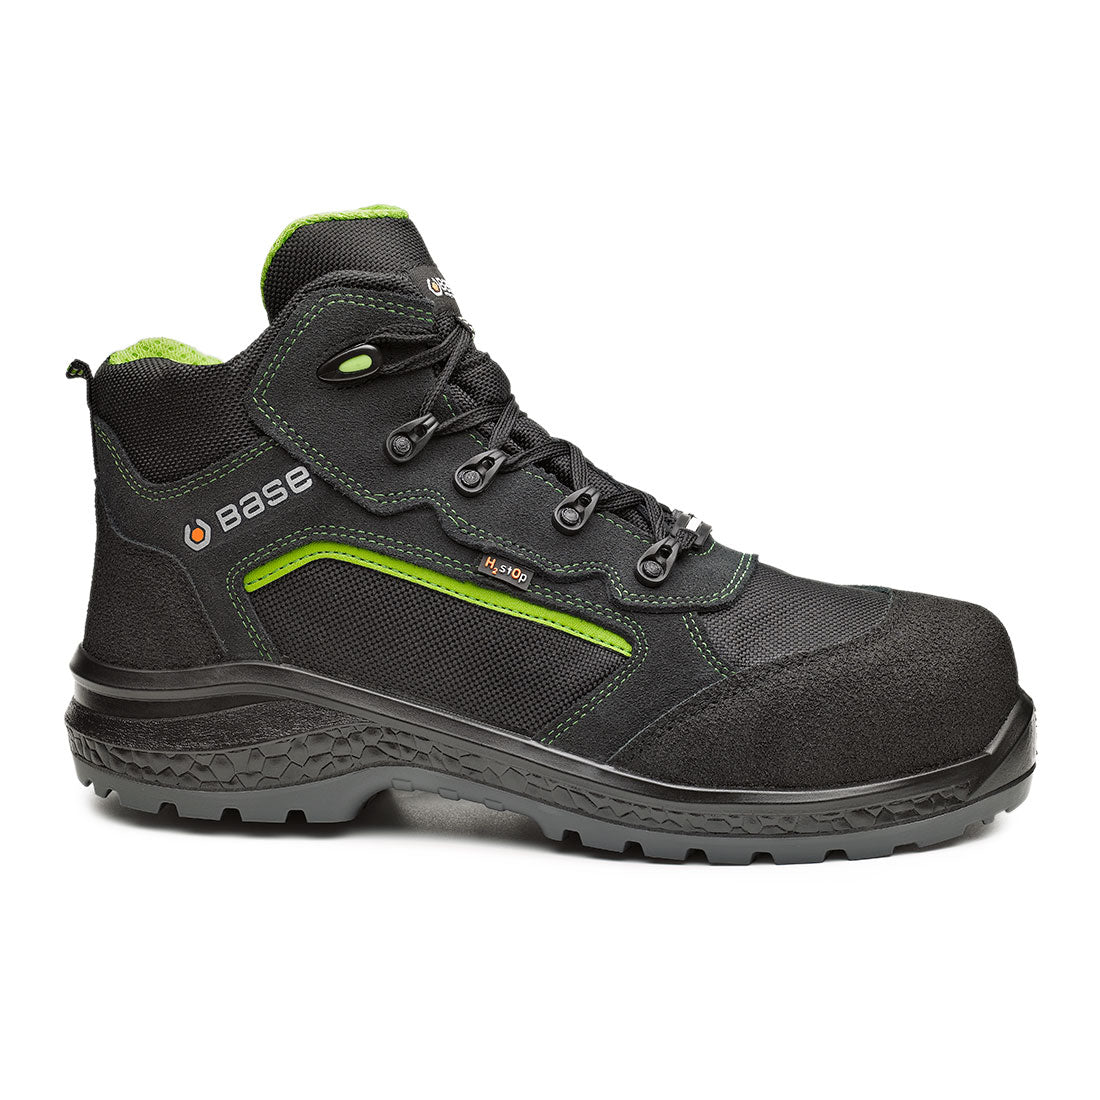 Base Be-Powerful Top Safety Boots S3 WR SRC